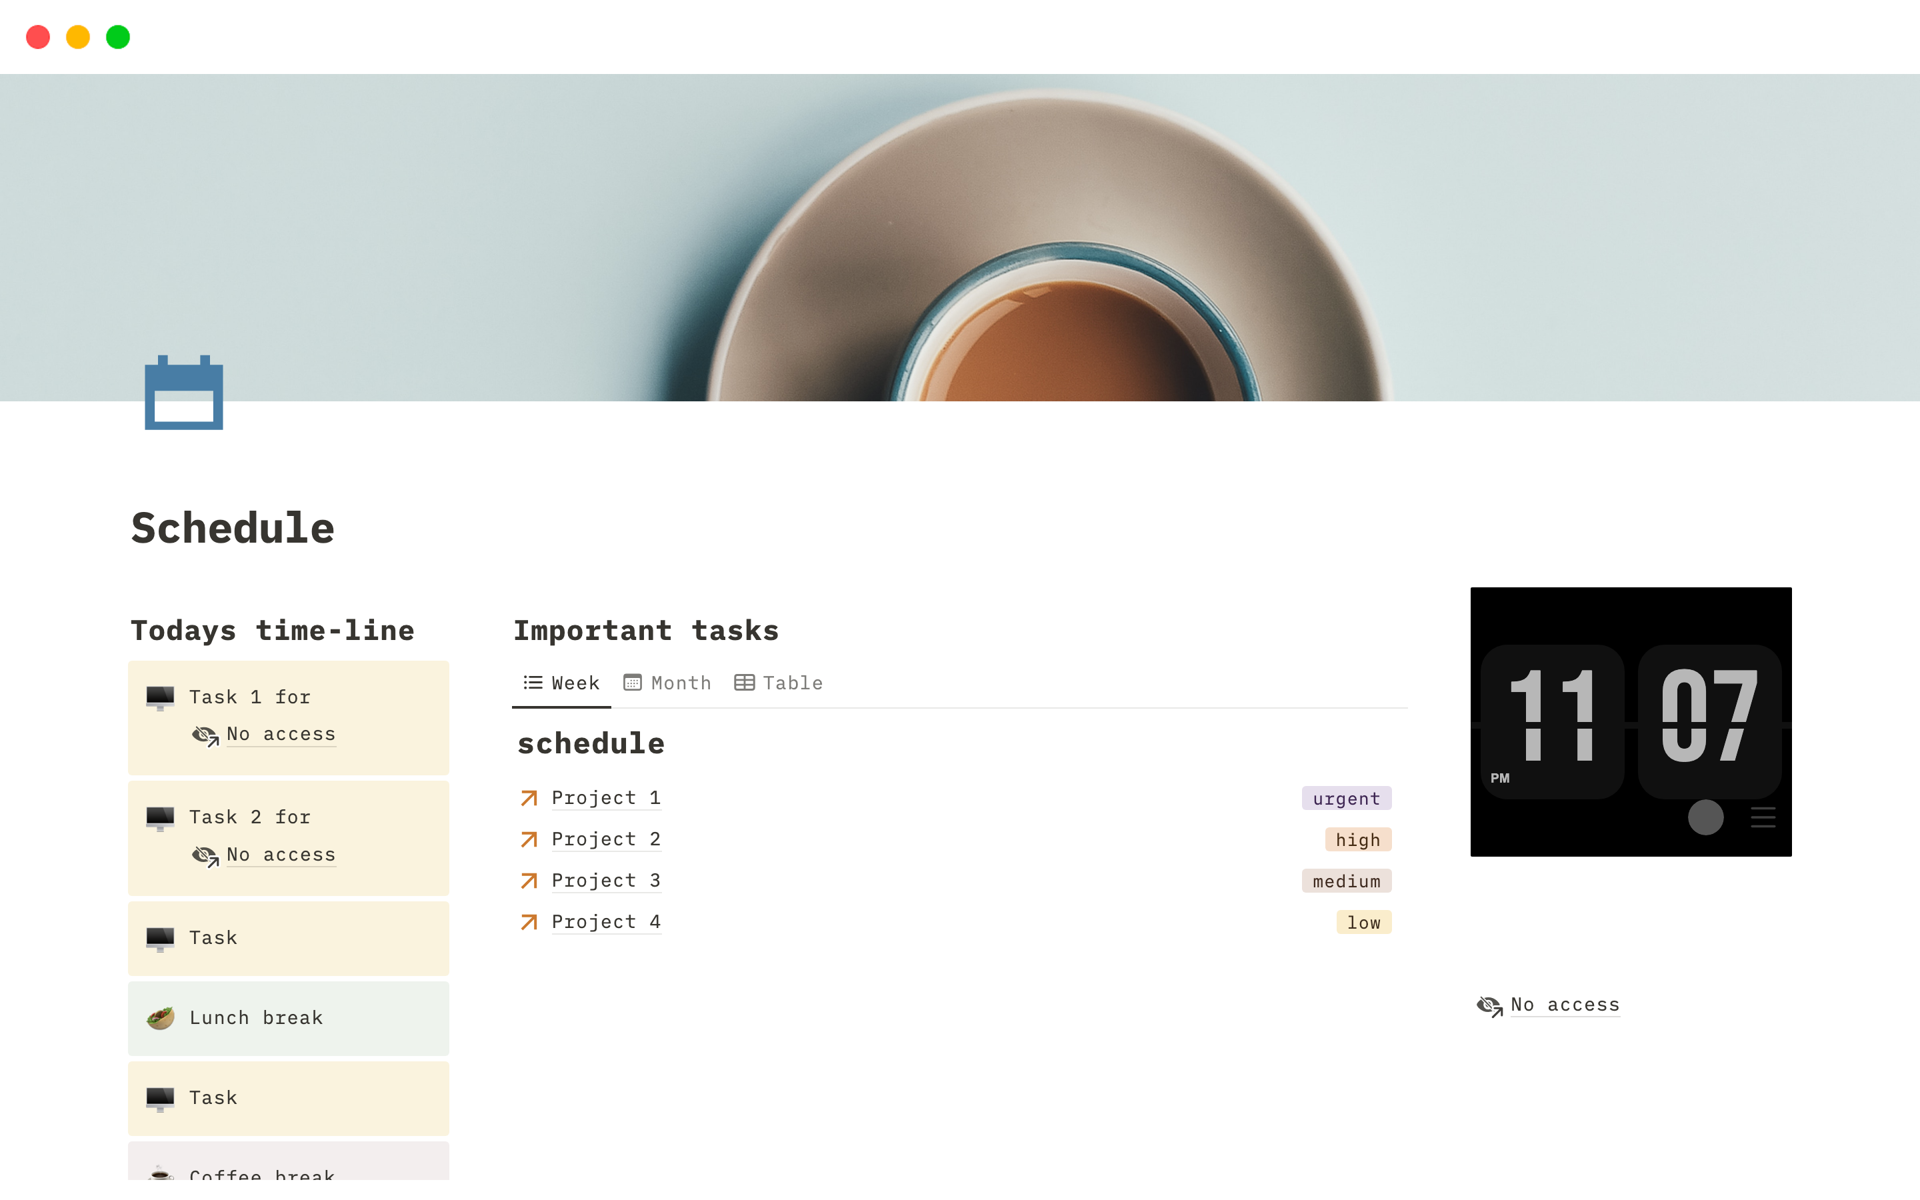 Designed to streamline your daily, weekly, and monthly planning, this template provides a comprehensive view of your tasks, projects, and appointments.